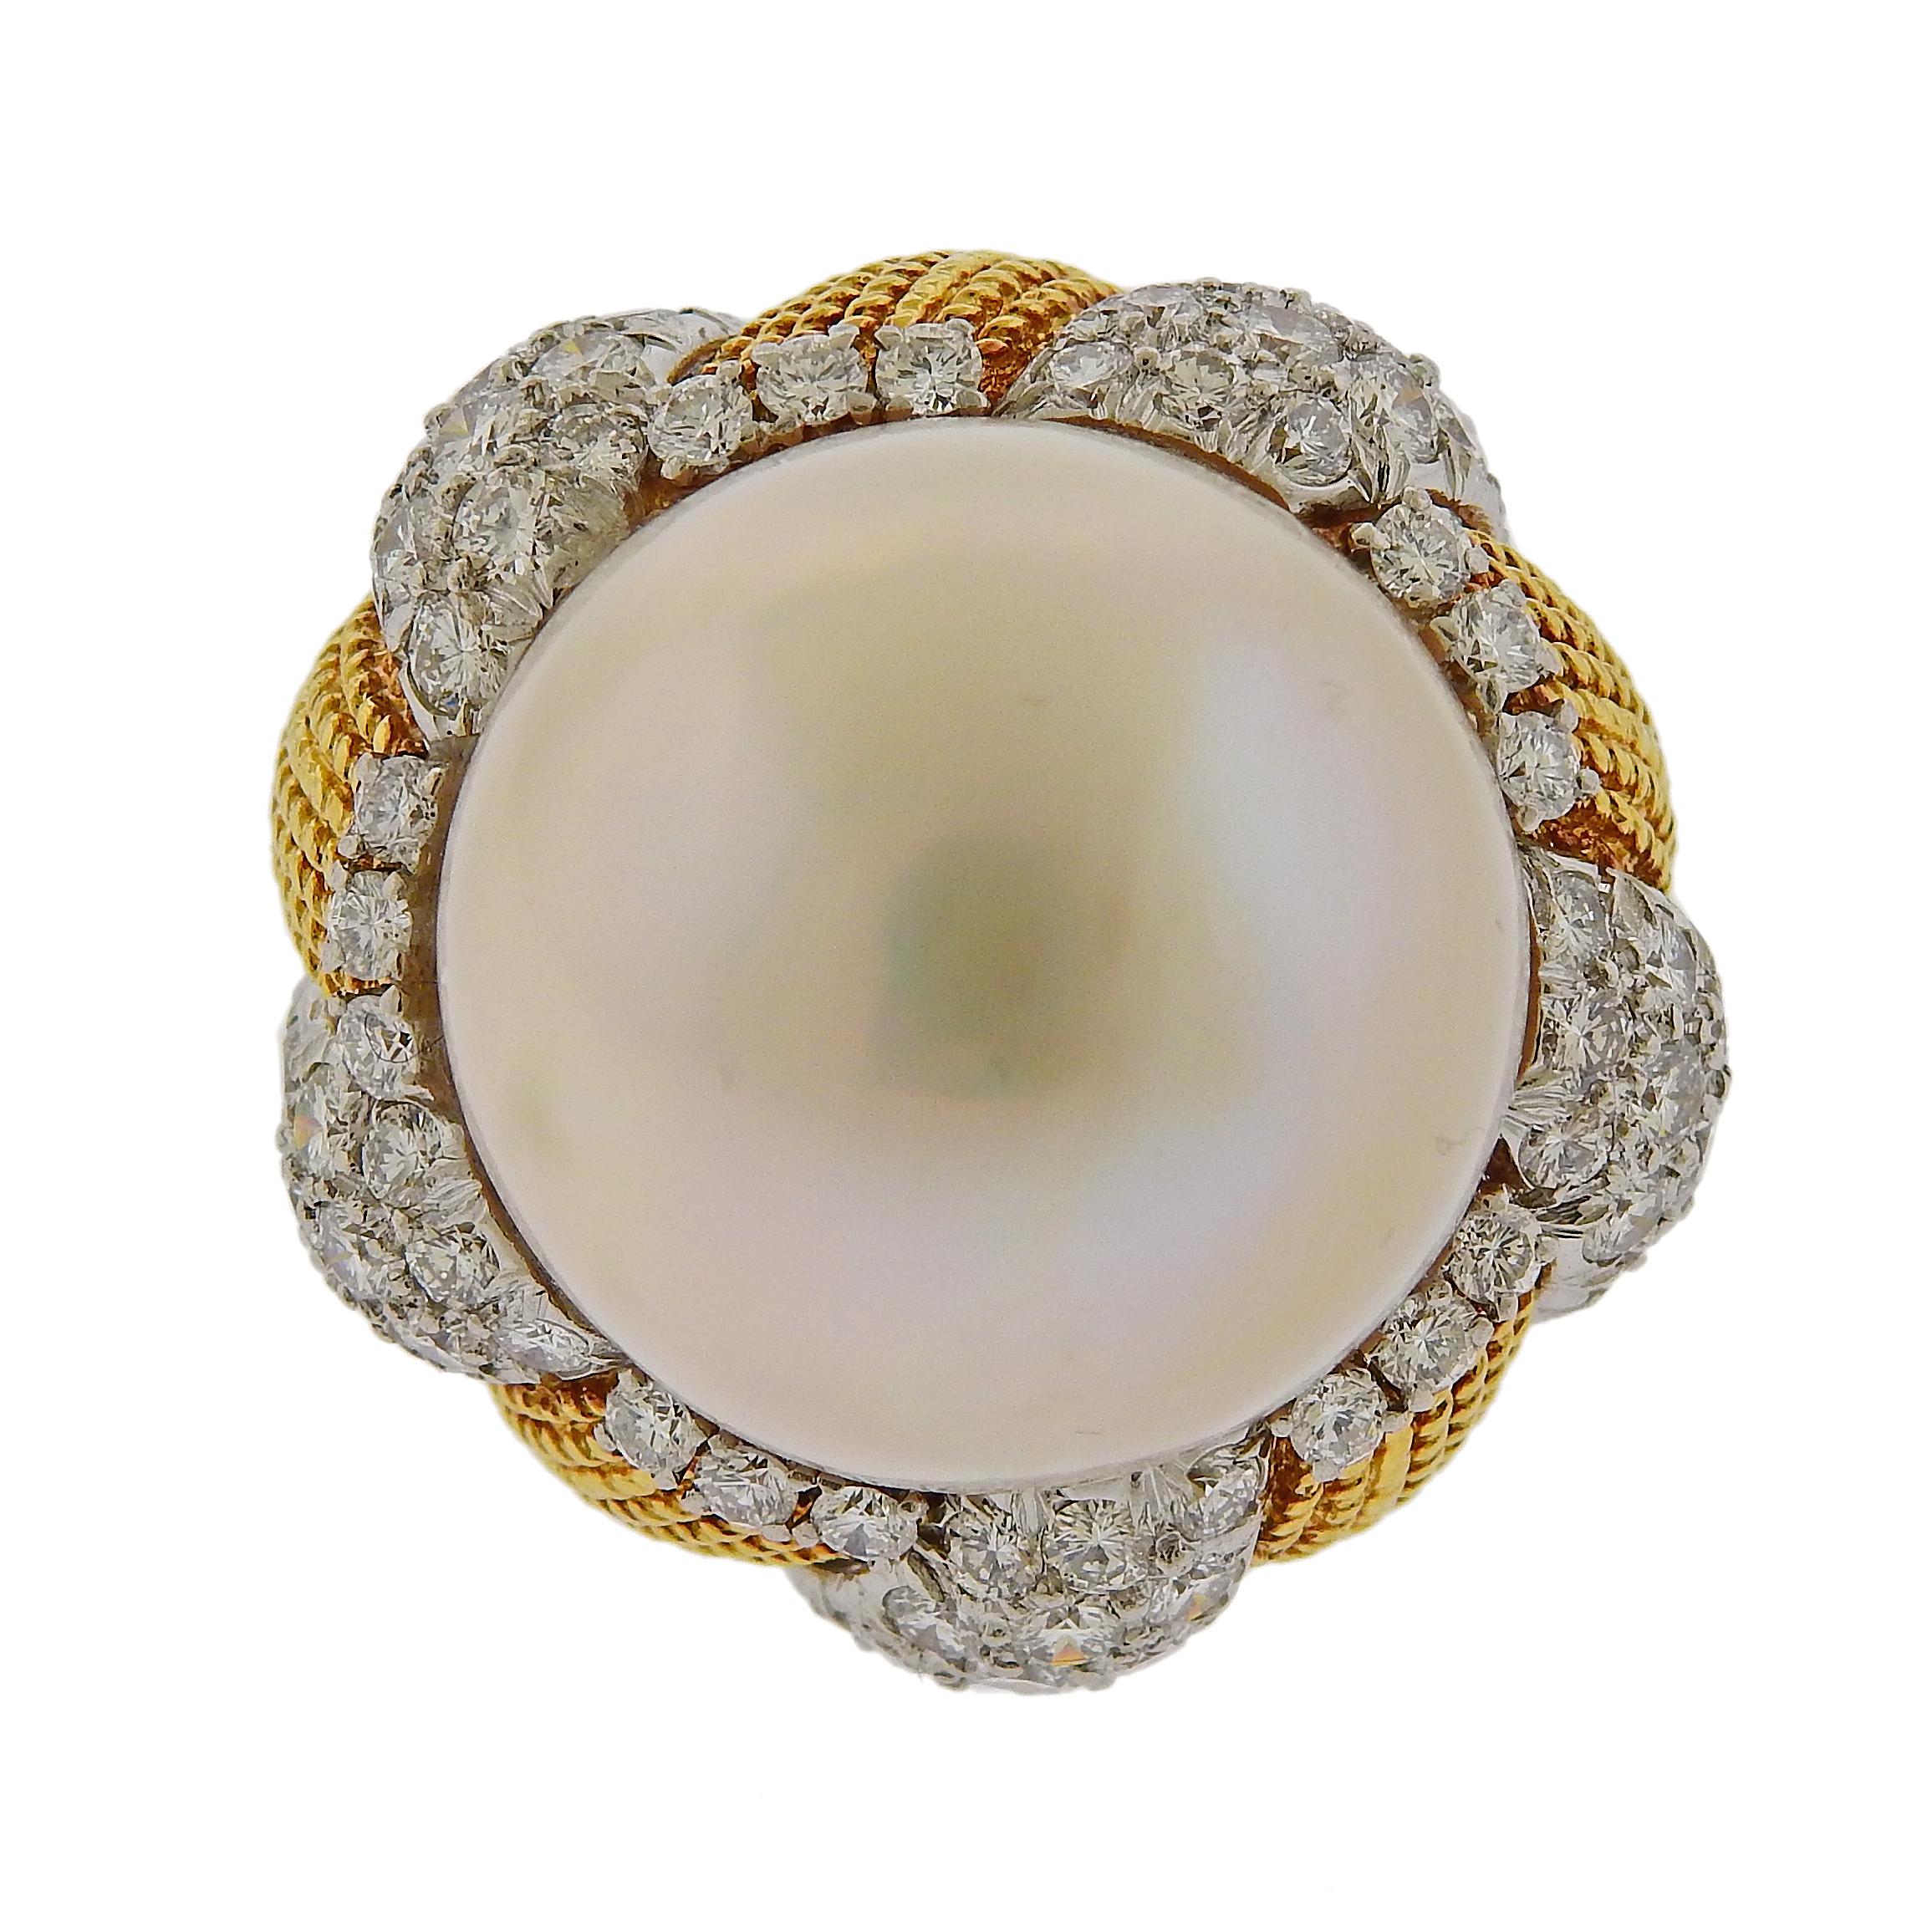 large 18k gold cocktail ring, set with a 20.2mm South Sea pearl, approx. 2.75ctw in diamonds. Ring size 5.5, ring top is 26mm x 28mm. Marked 750. Weighs 30.5 grams. 

SKU#R-03062